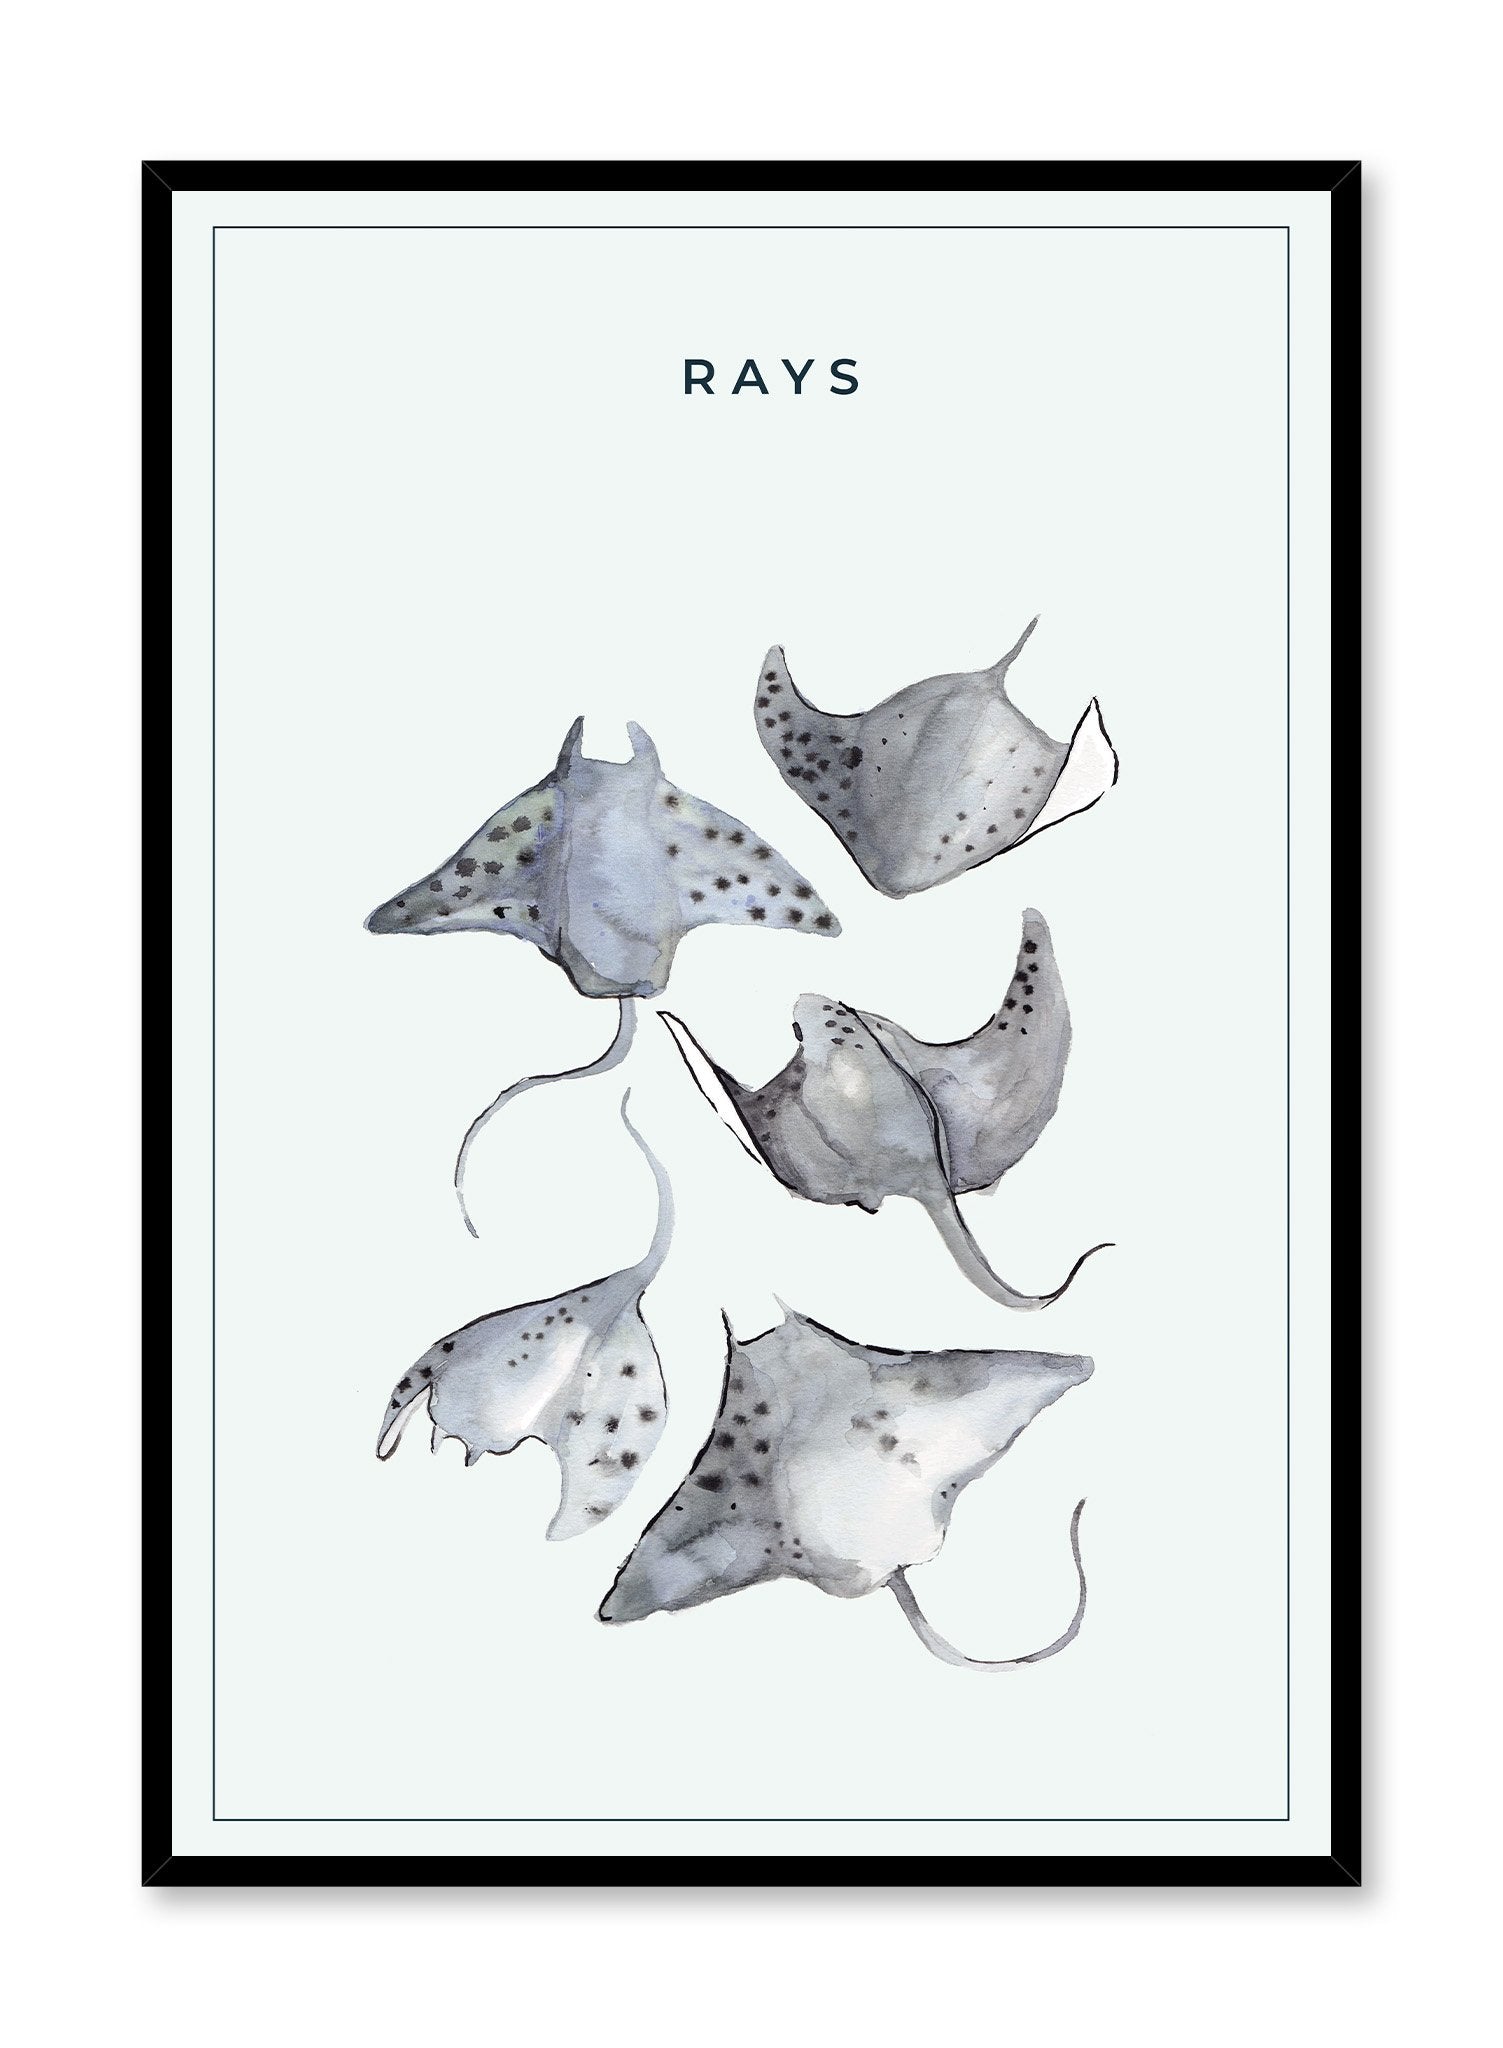 Ray Gang is a minimalist illustration of five grey rays with dots on their pectoral fins by Opposite Wall.